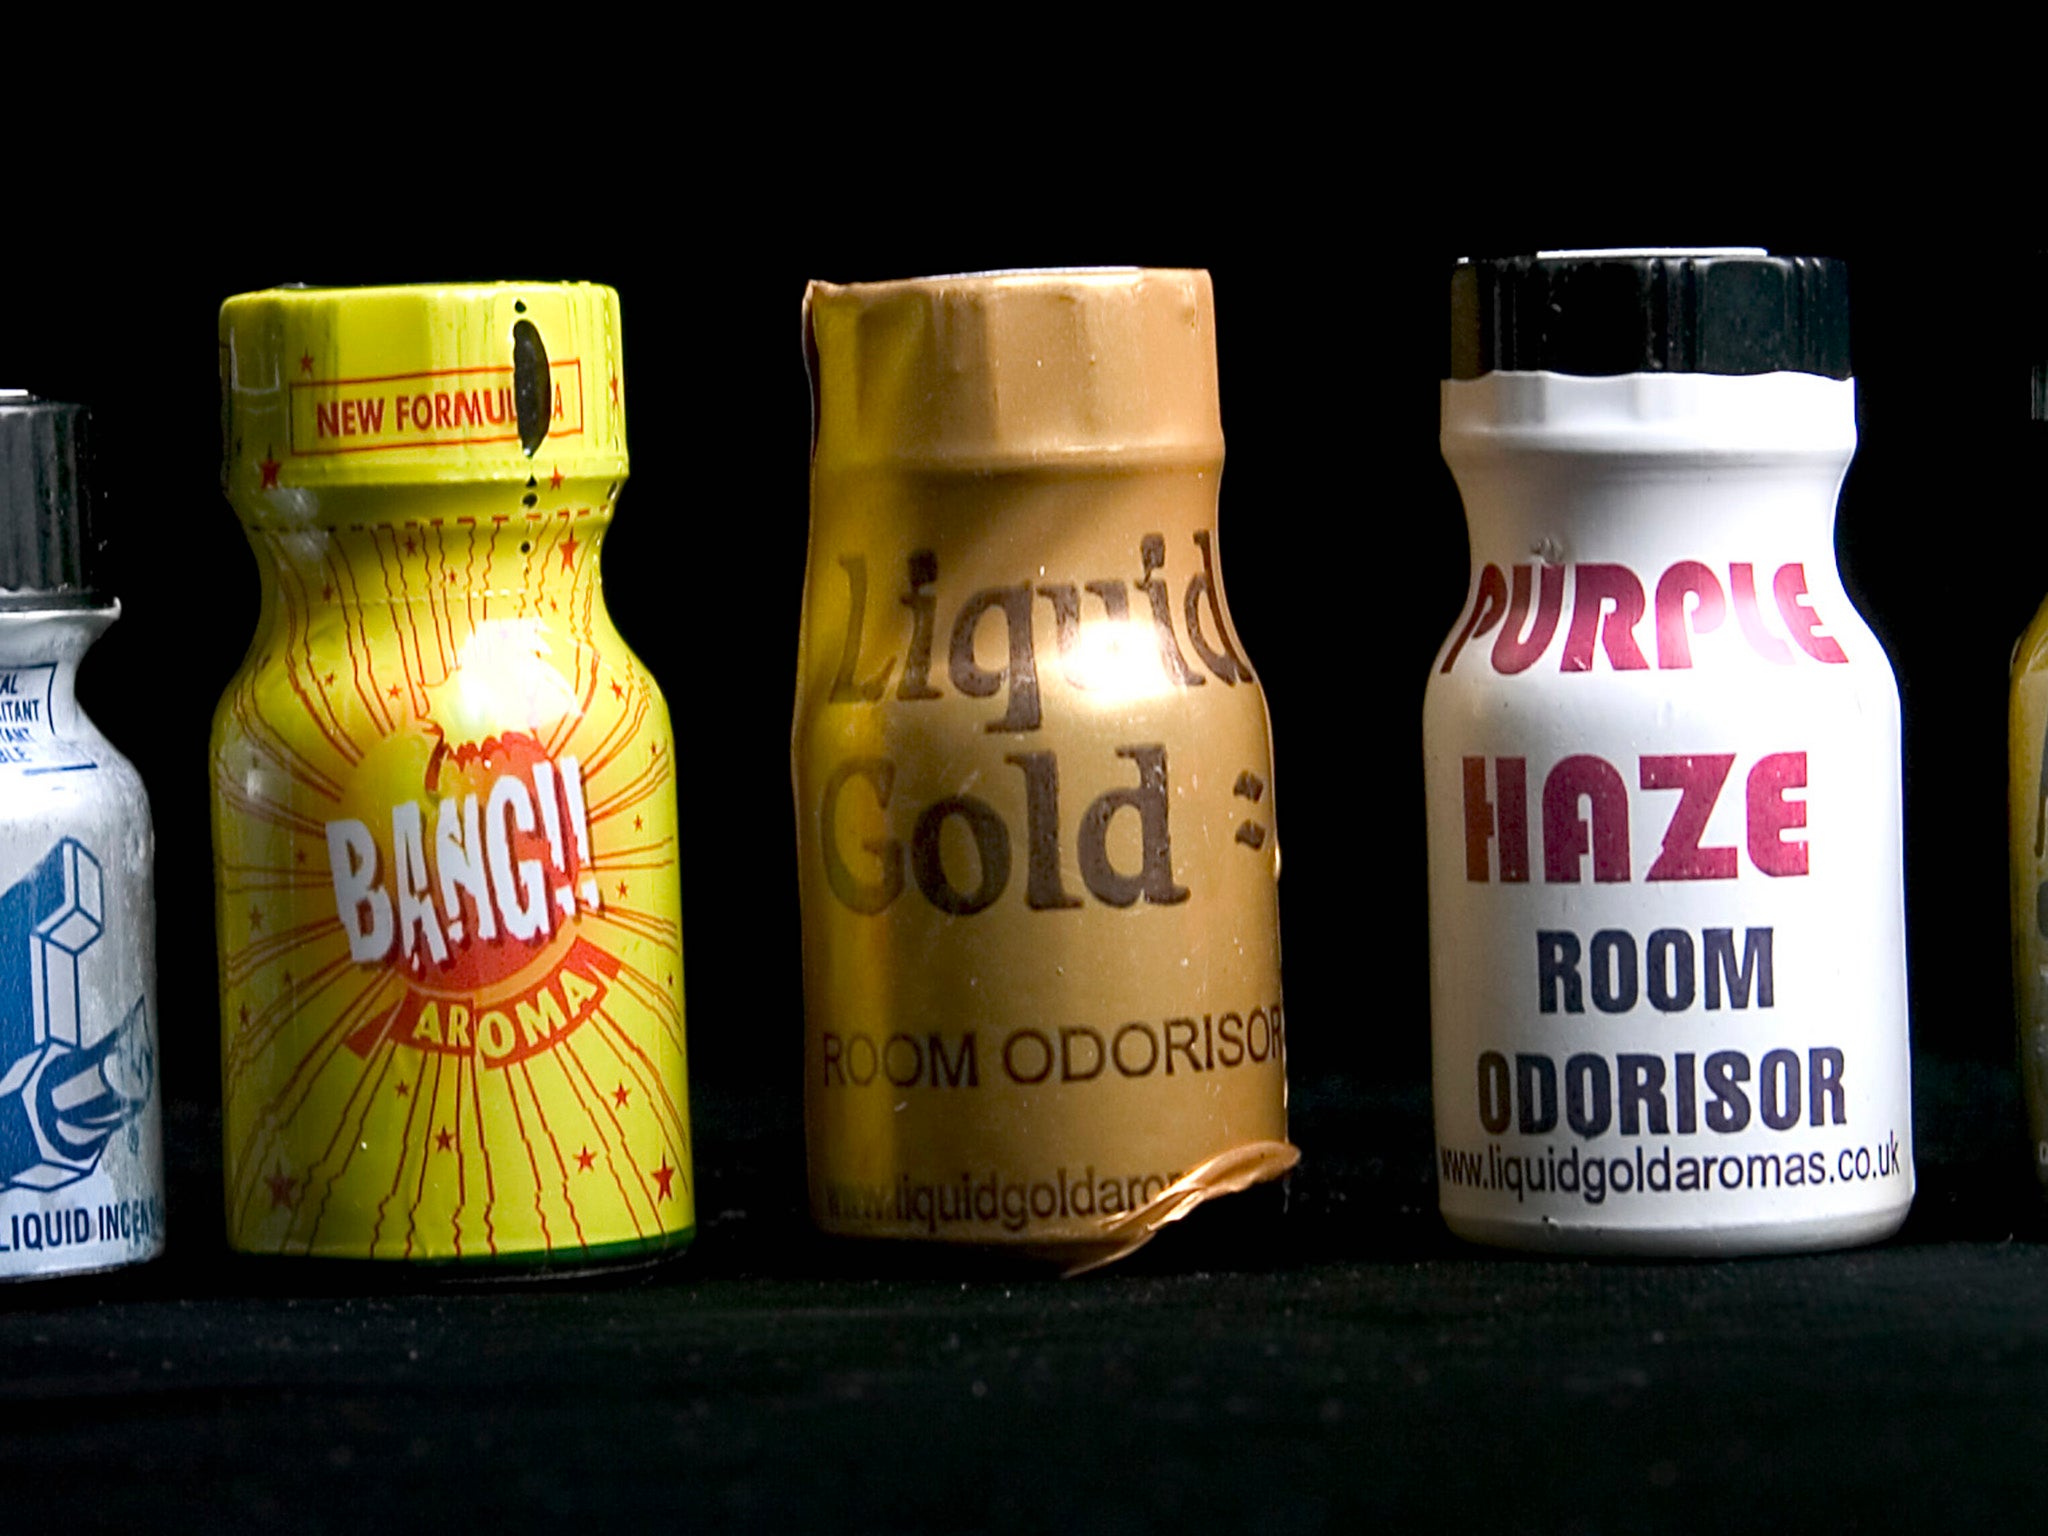 There have been calls to ban poppers in the United Kingdom